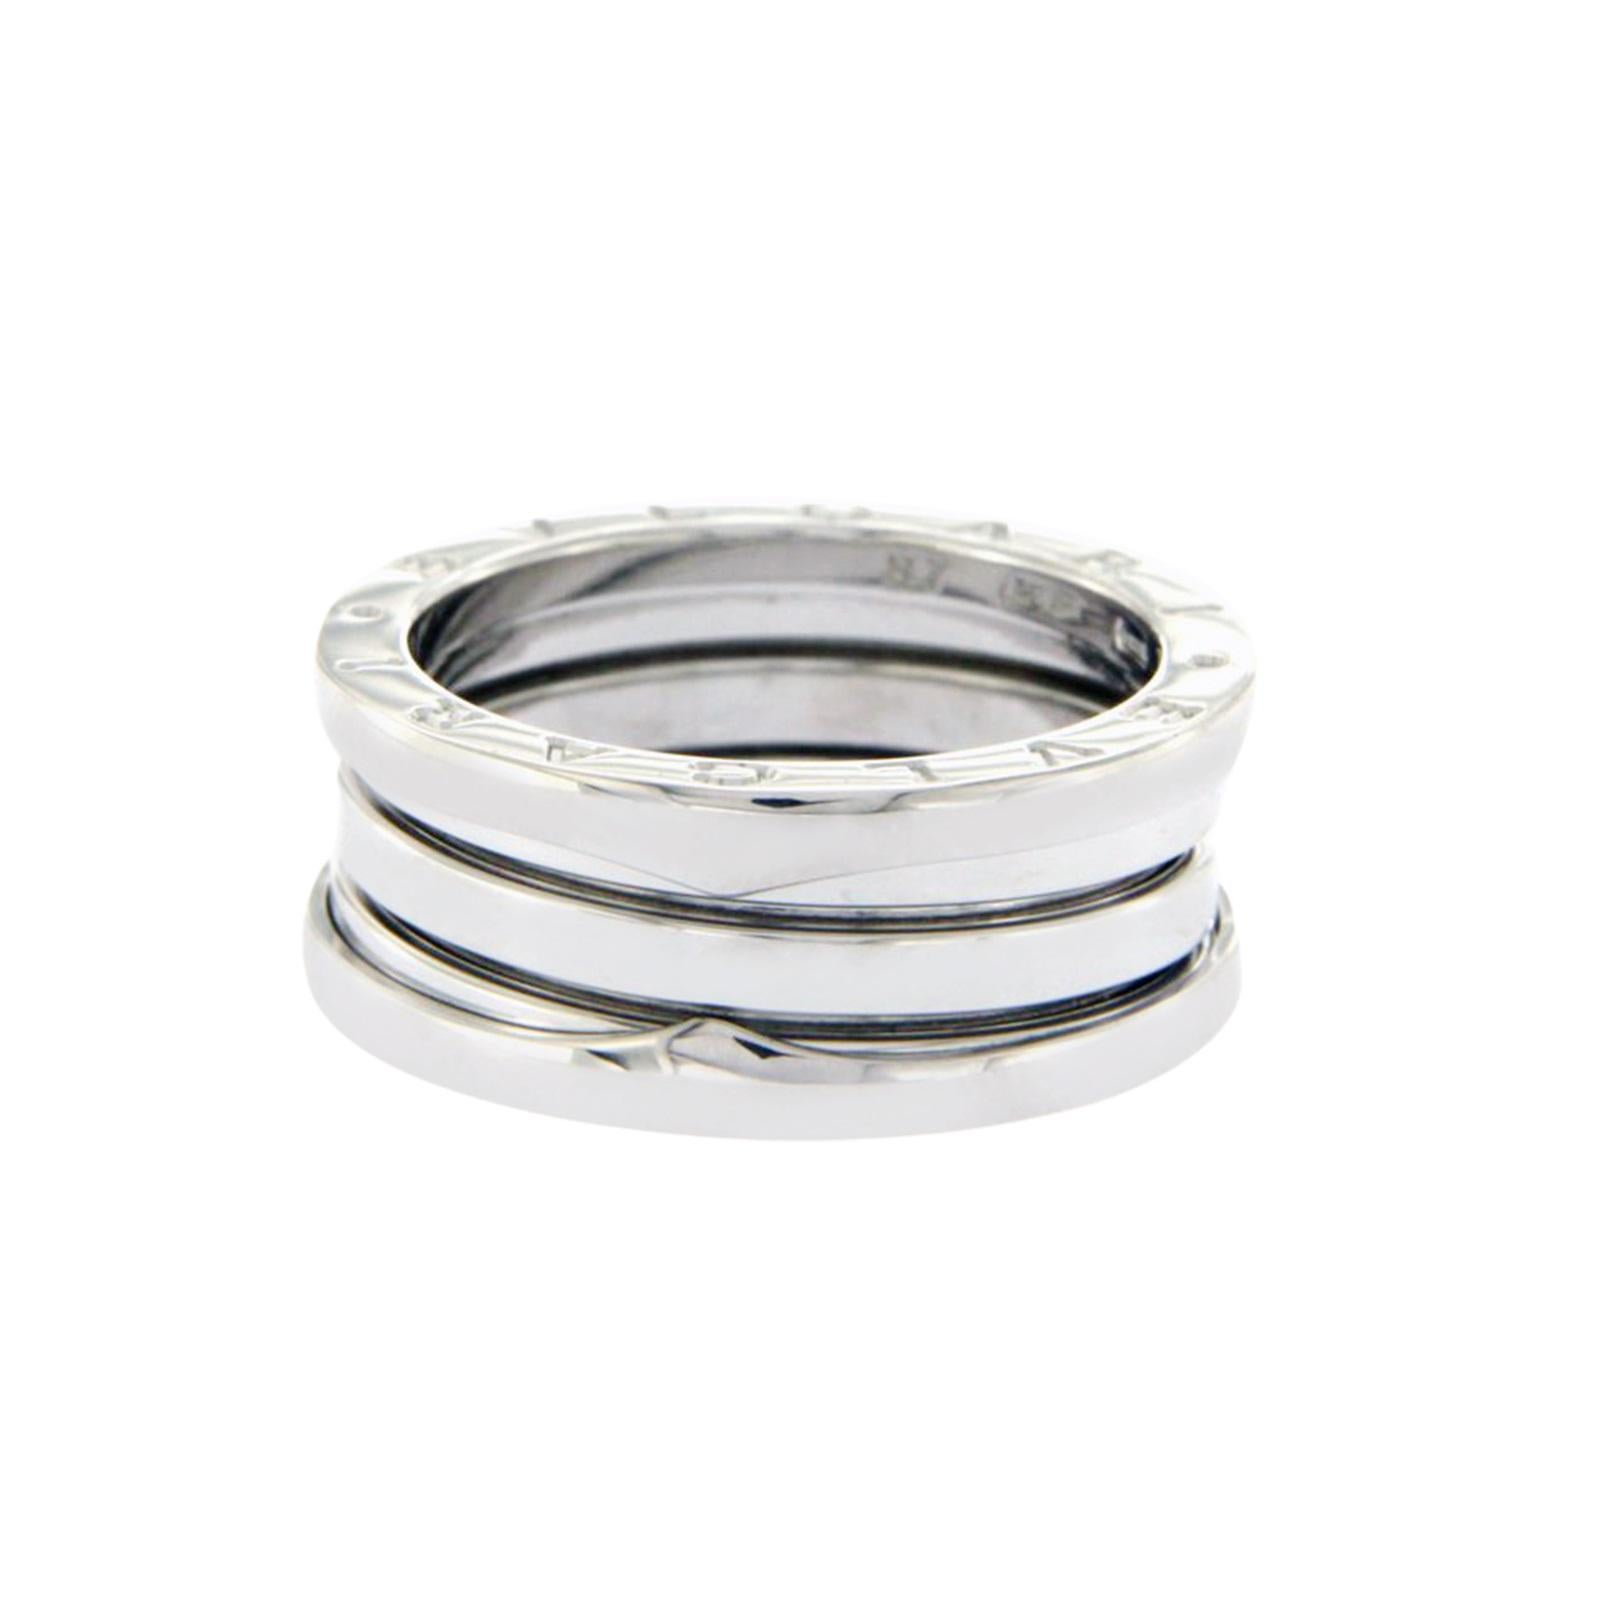 100% Authentic, 100% Customer Satisfaction

Top: 9 mm

Band Width: 9 mm

Metal: 18K White Gold 

Size: 49 -US 5

Hallmarks: BVLGARI  750 Italy 

Total Weight:  10.3 Grams

Stone Type: None

Condition: Pre Owned

Estimated Retail Price: $2100

Stock